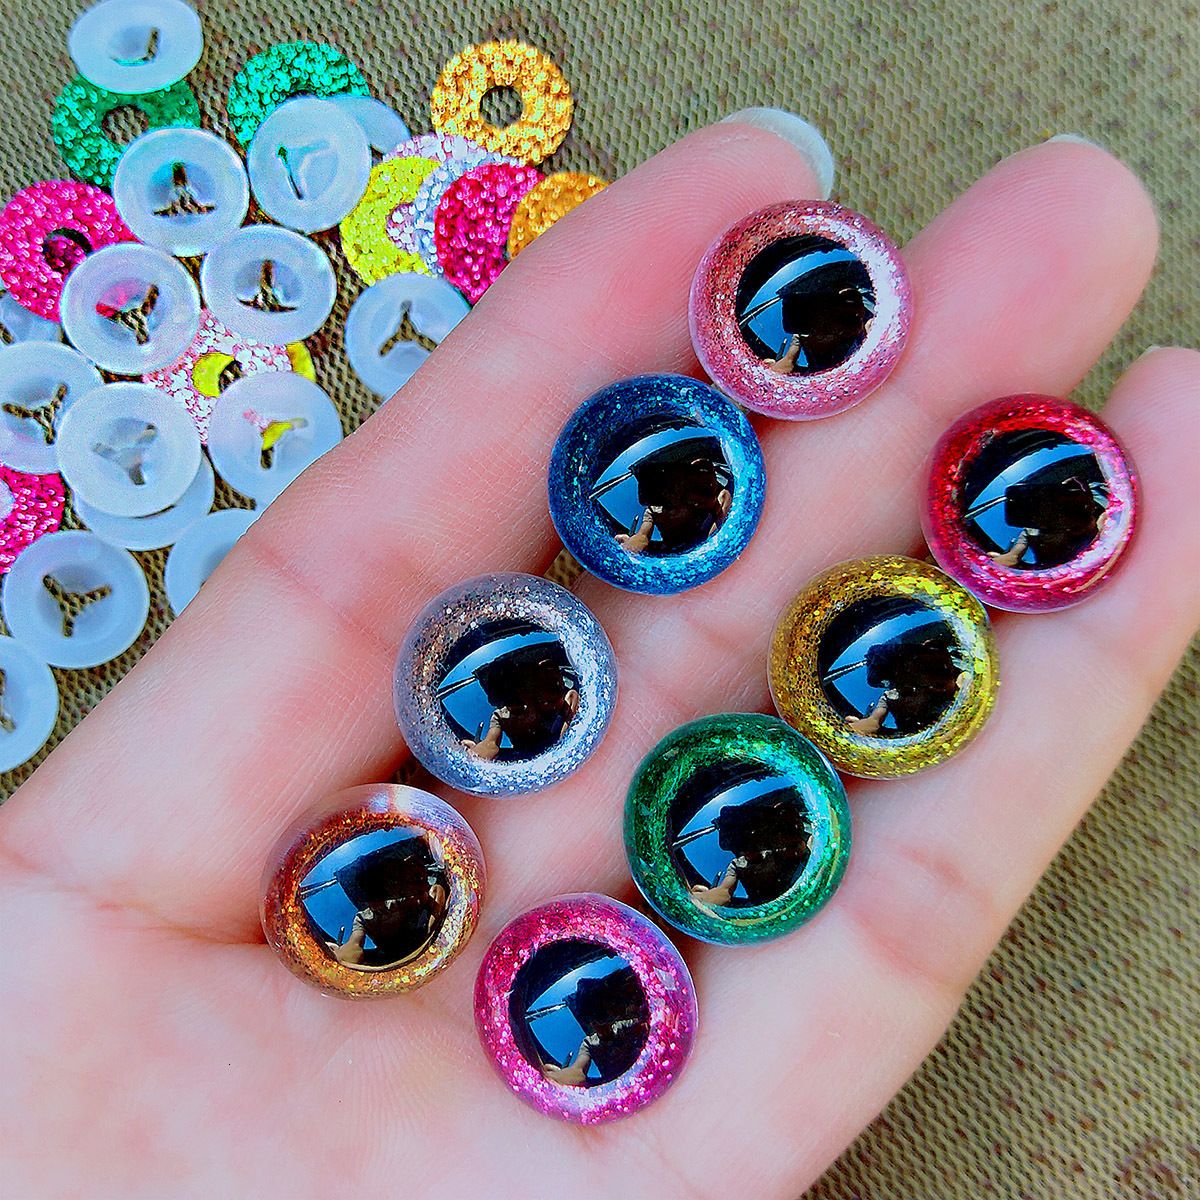 Doll Accessories 3D Plastic Glitter Safety Eyes For Crochet Toys Amigurumi  Diy Mix Bulk Mixed Sizes Toy Making 10121416182022mm 230512 From Dang08,  $8.41